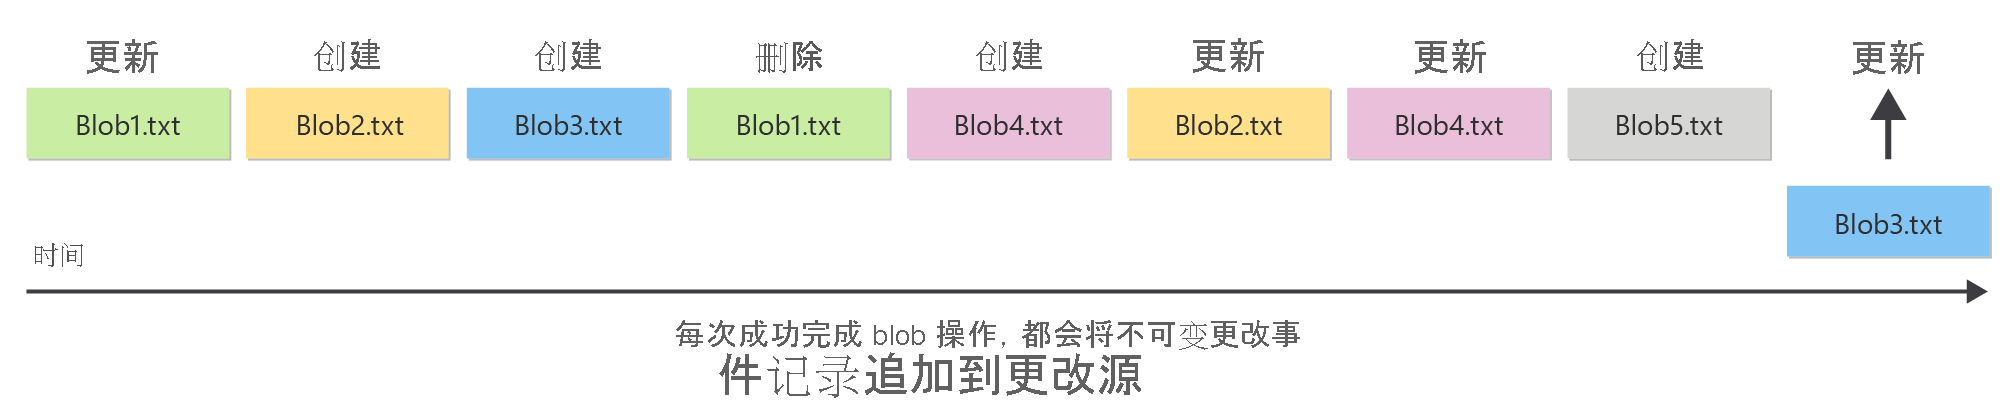 Diagram showing how the change feed works to provide an ordered log of changes to blobs